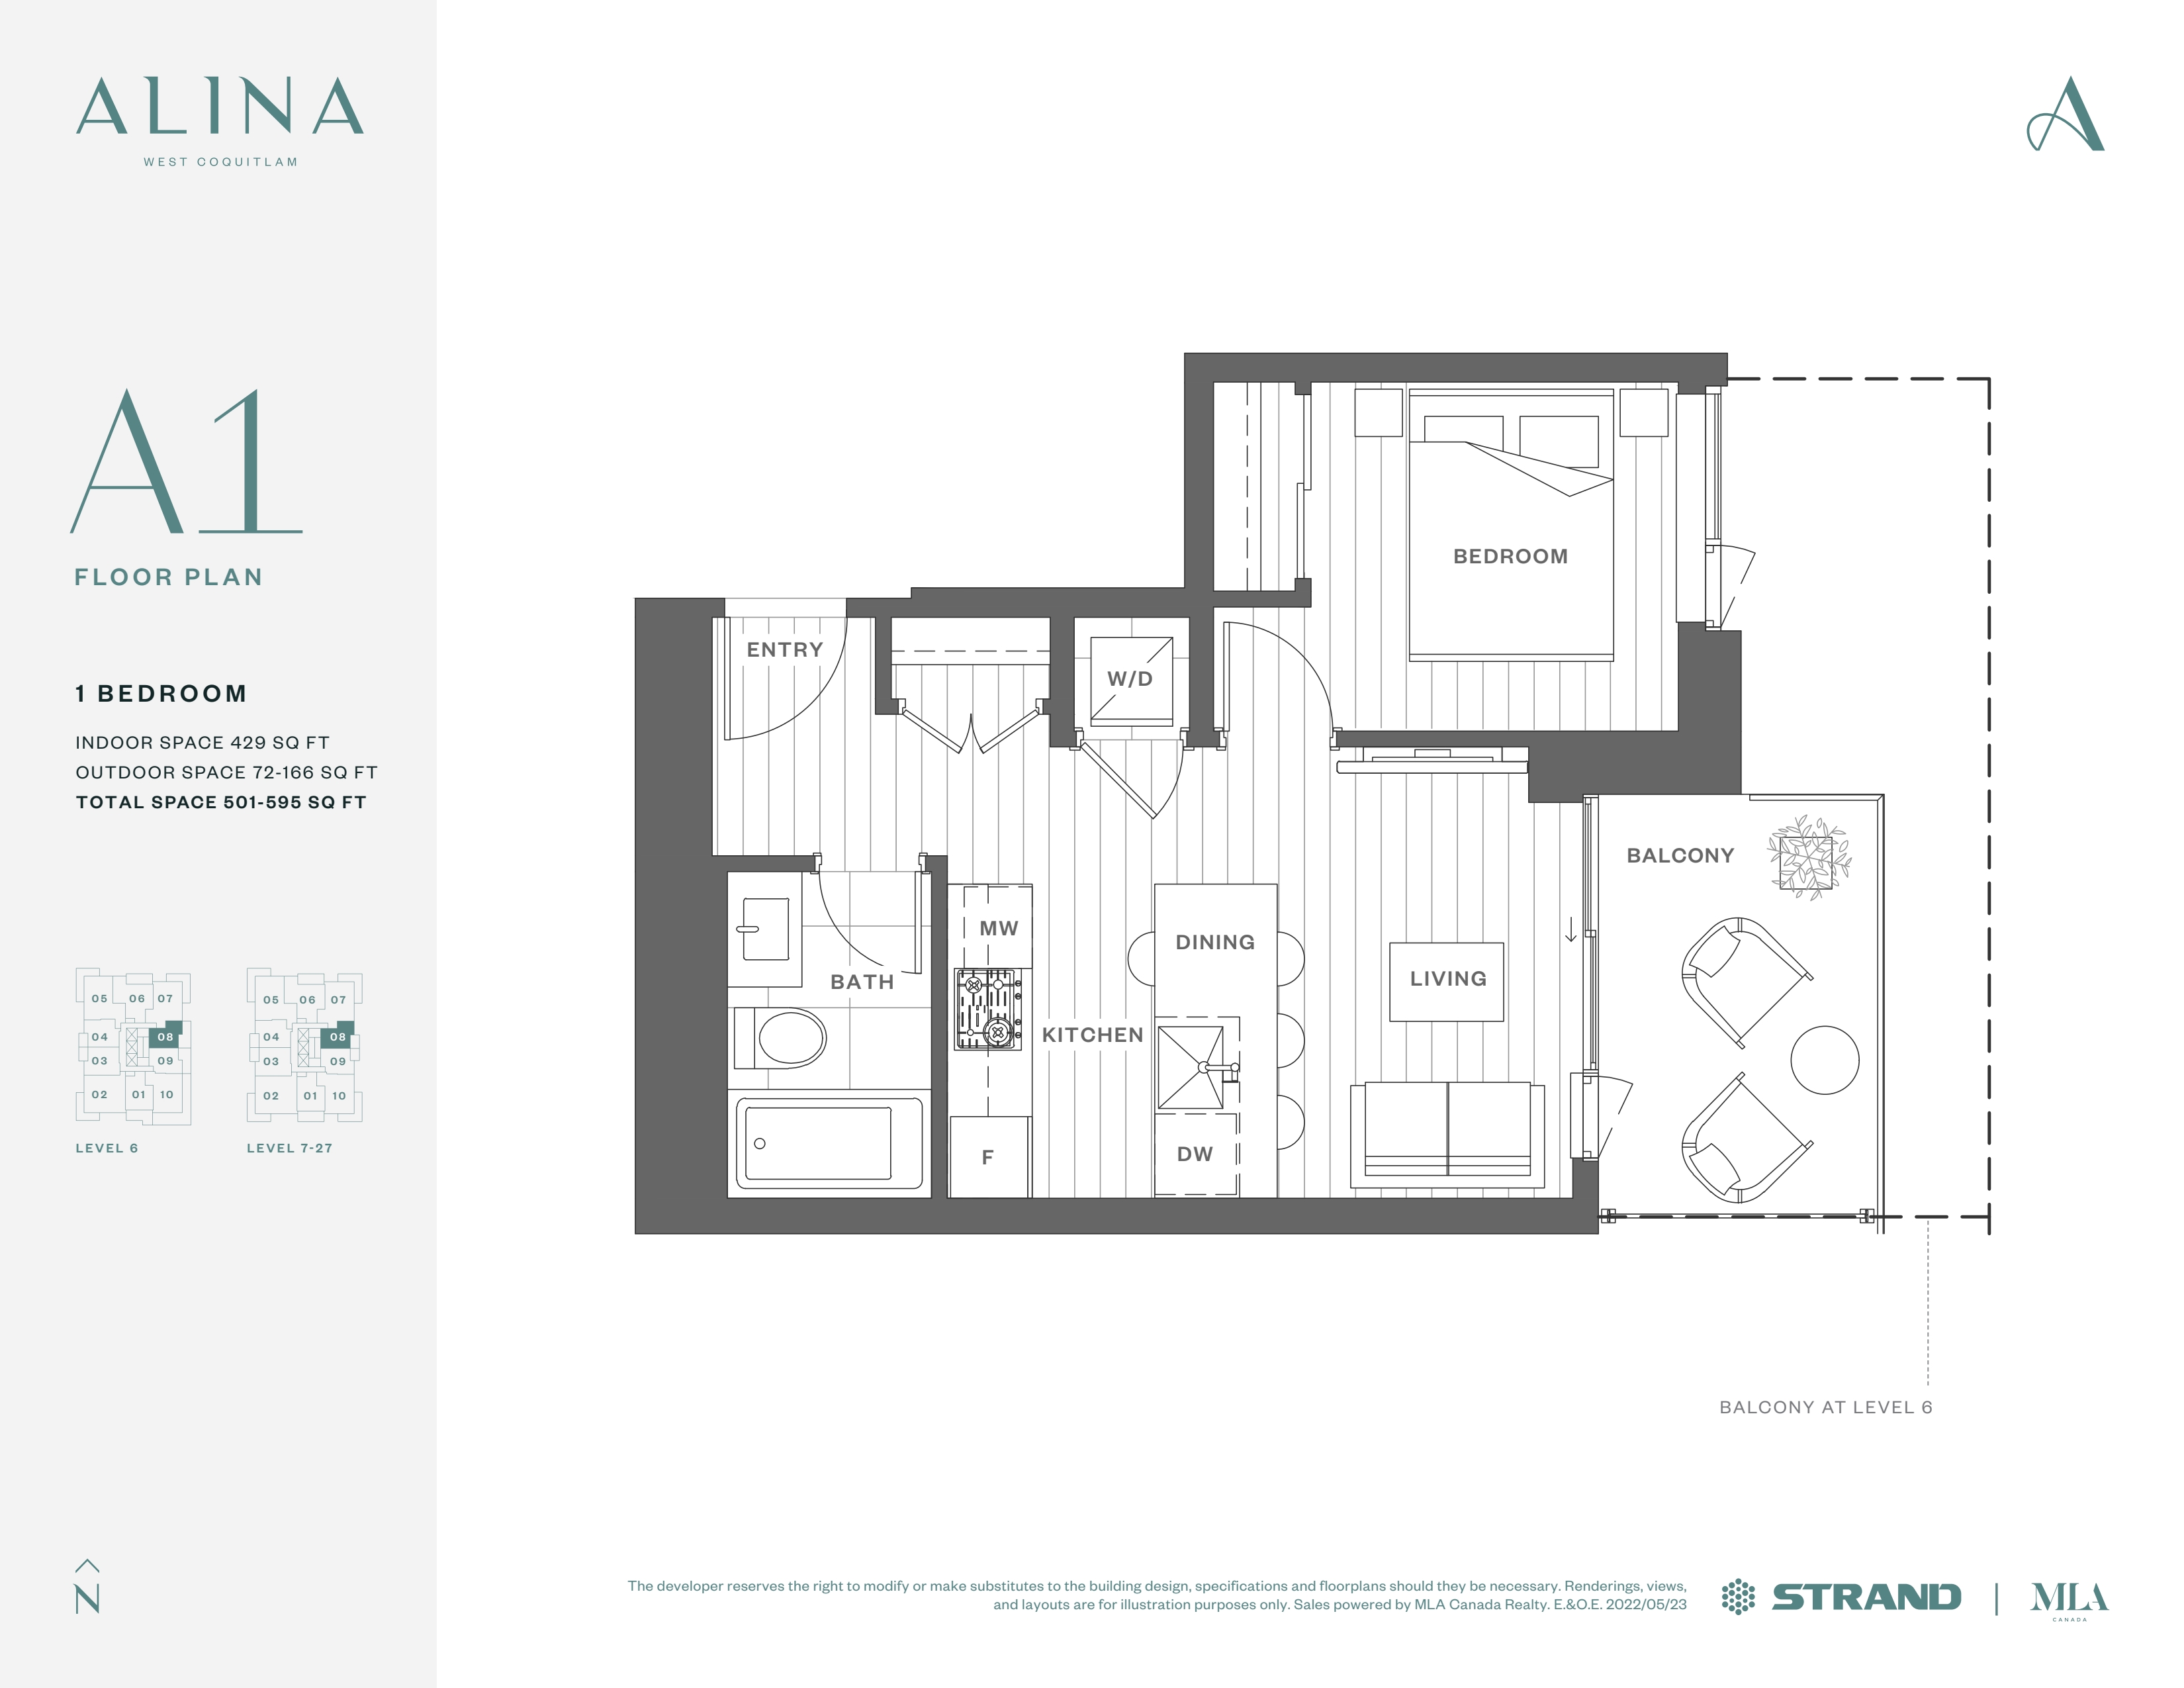  Floor Plan of Alina Condos with undefined beds